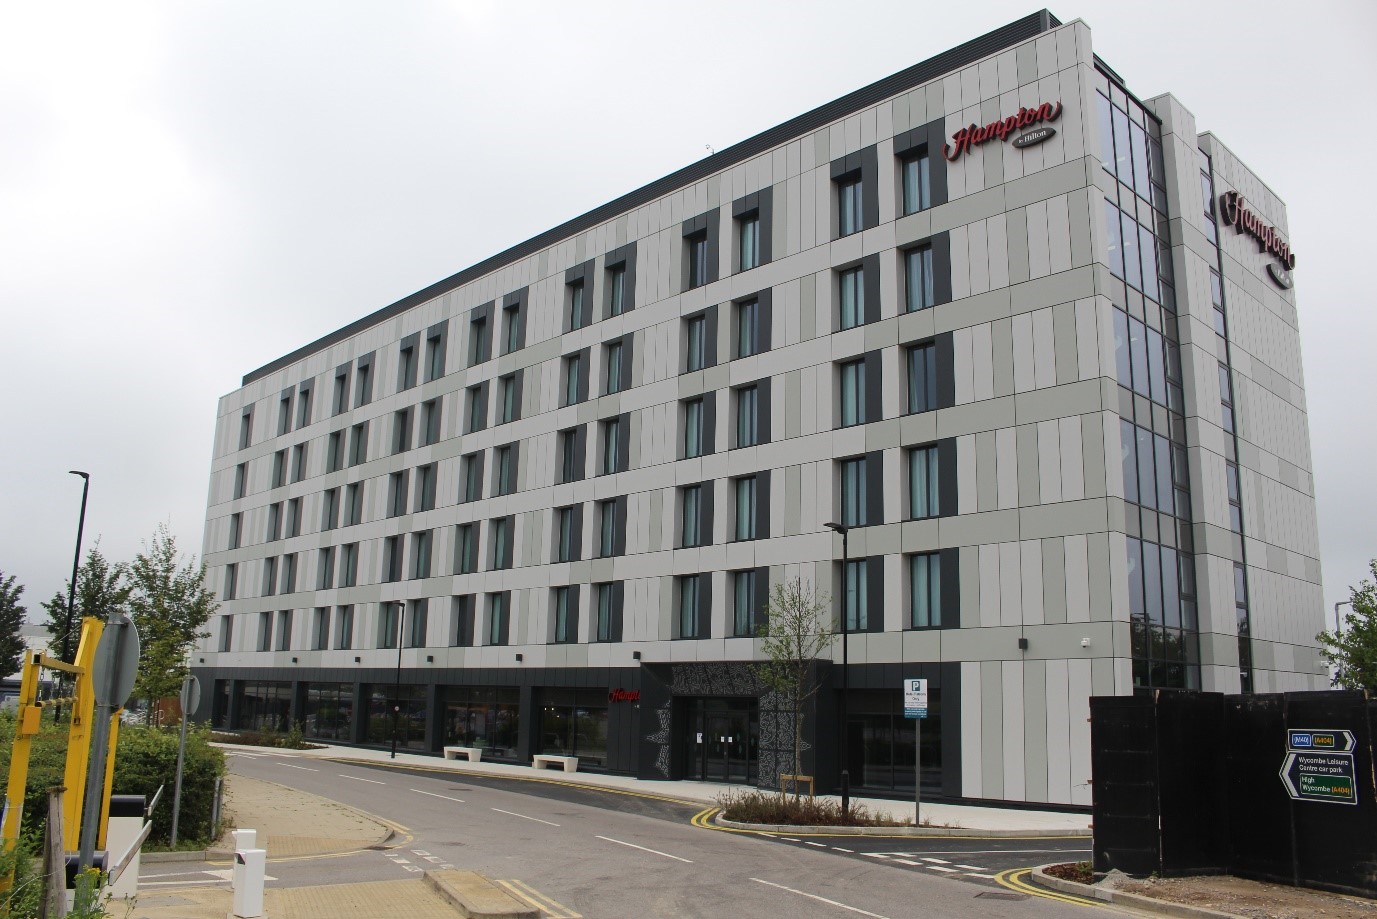 Construction of a new Hampton by Hilton Hotel for our Client RG Group in High Wycombe